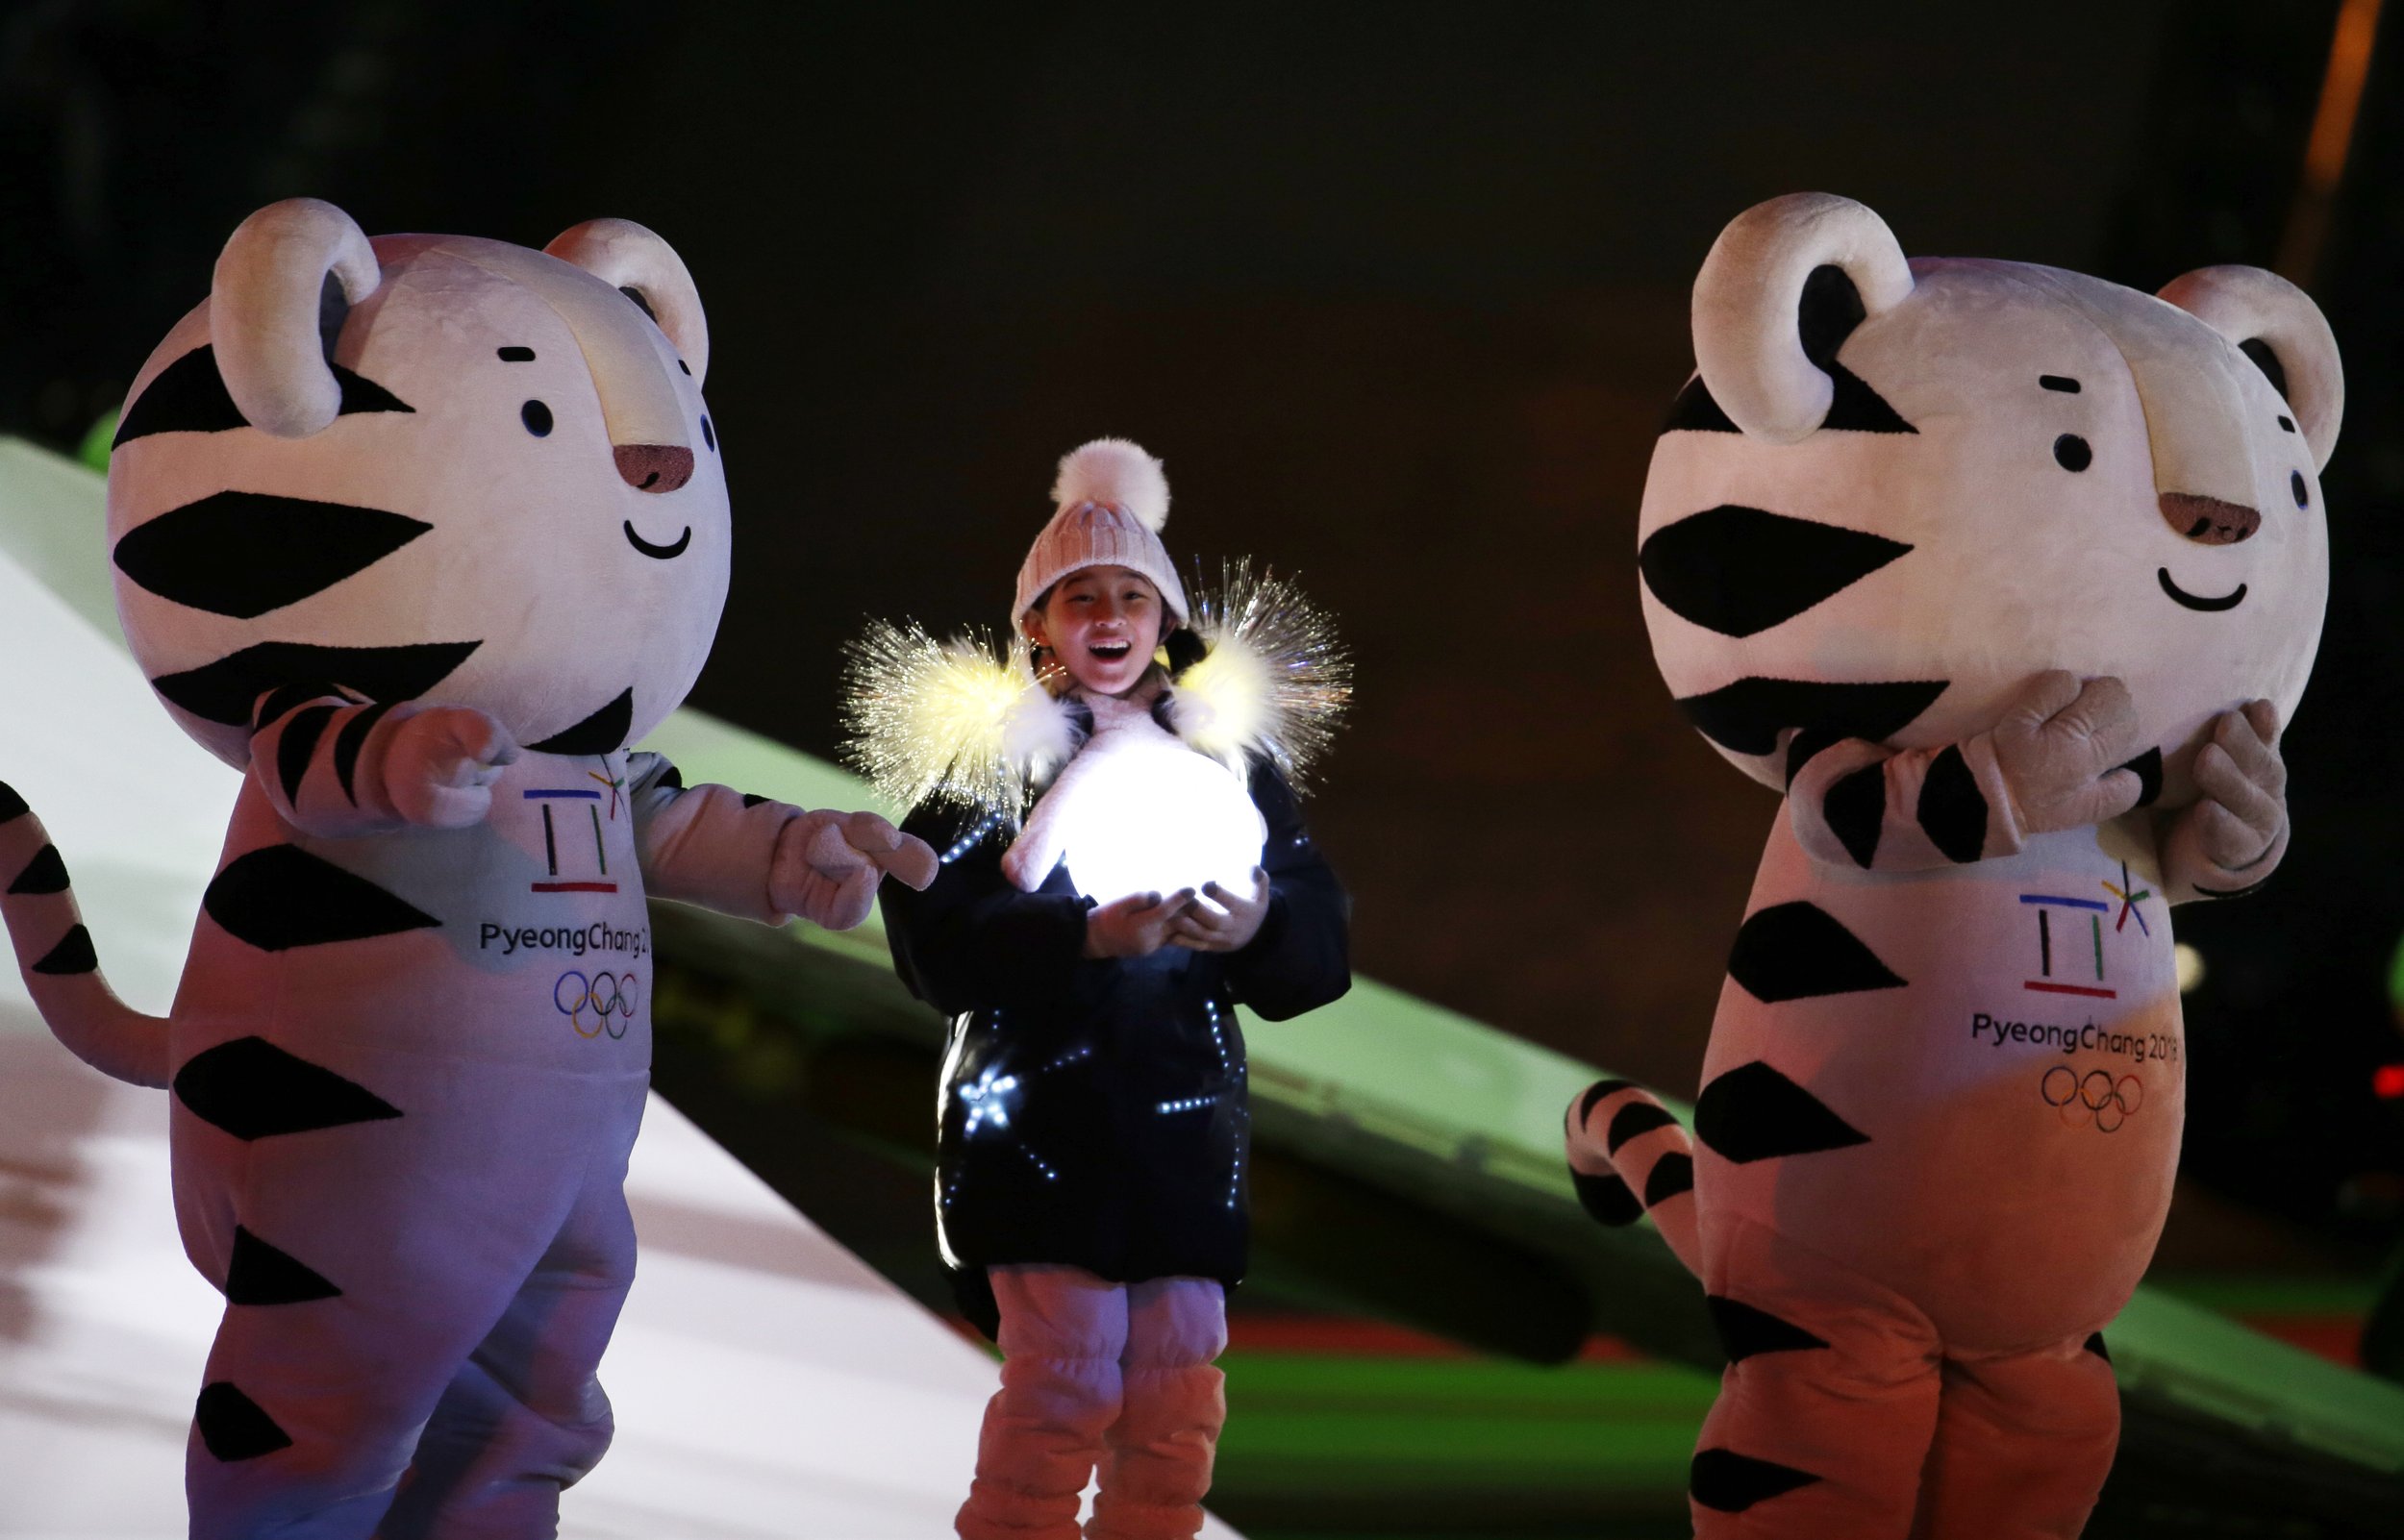  Olympic mascots and a young girl participate in the closing ceremony of the 2018 Winter Olympics in Pyeongchang, South Korea, Feb. 25, 2018. (AP Photo/Natacha Pisarenko) 